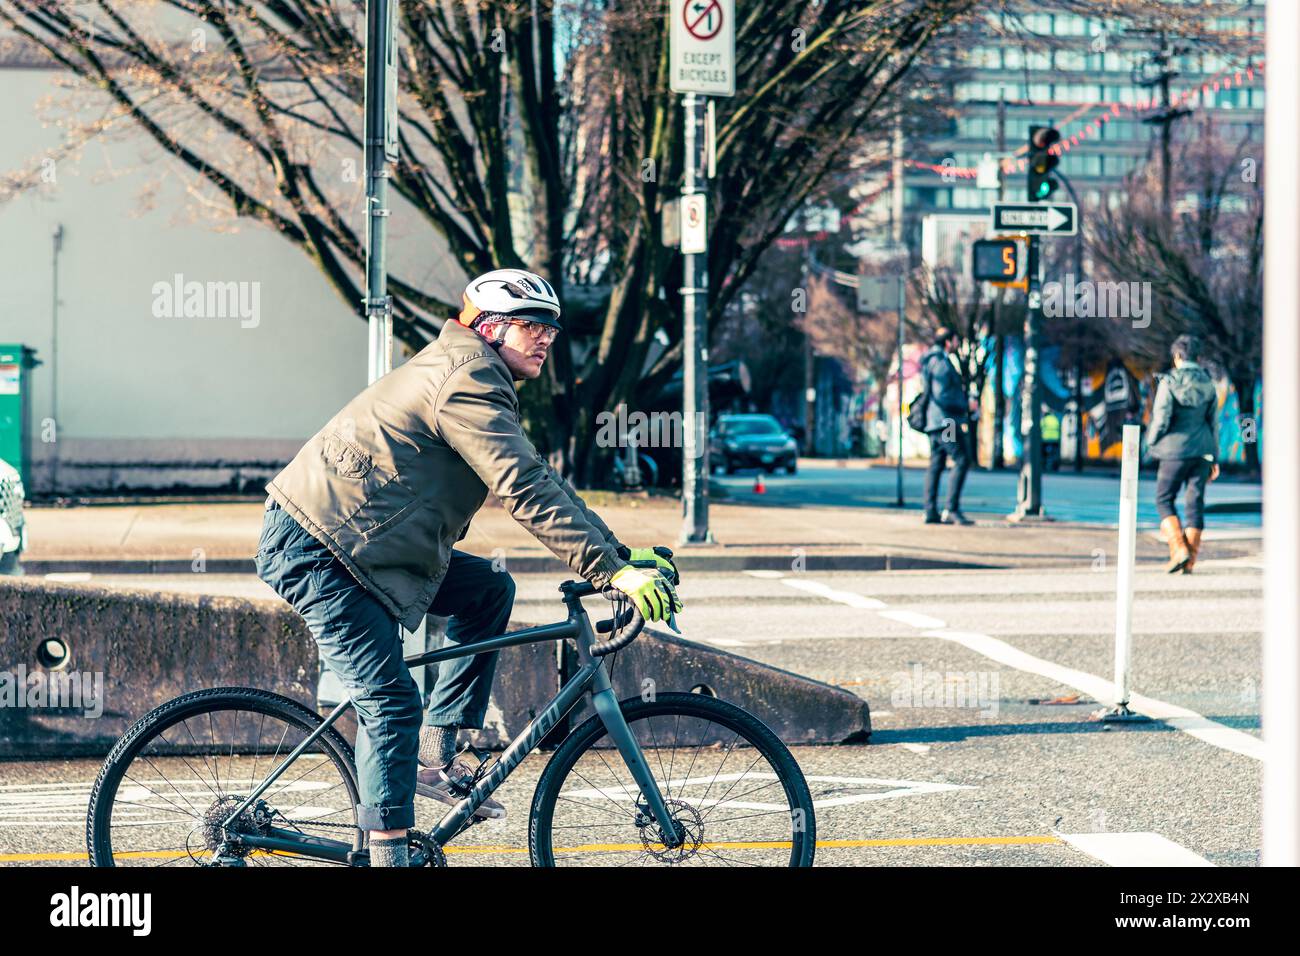 A man riding a road bike in the bike lane stopped at a traffic light at the intersection of Dunsmuir and Citadel Parade streets. Stock Photo